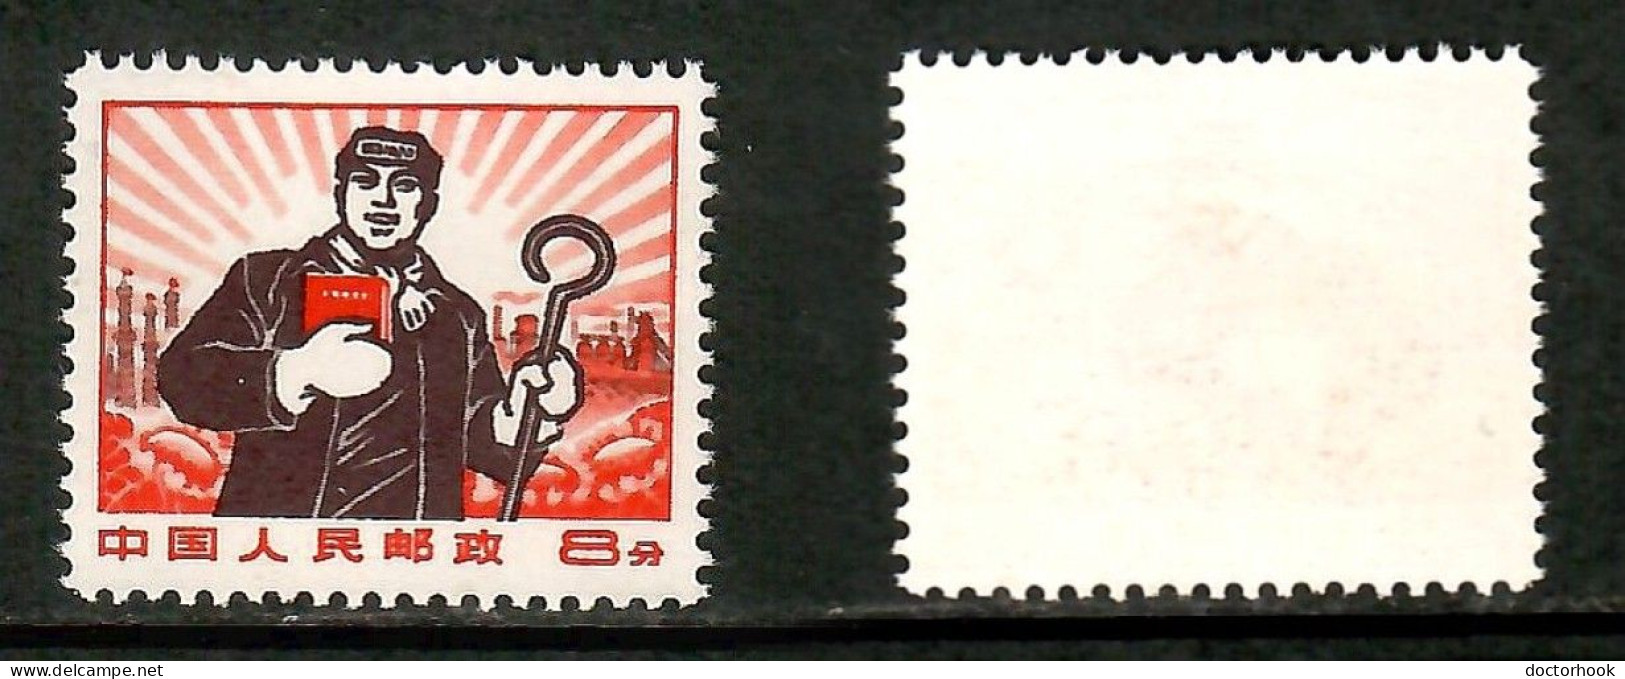 PEOPLES REPUBLIC Of CHINA   Scott # 1017a* MINT NO GUM AS ISSUED (CONDITION AS PER SCAN) (Stamp Scan # 1012-2) - Nuevos